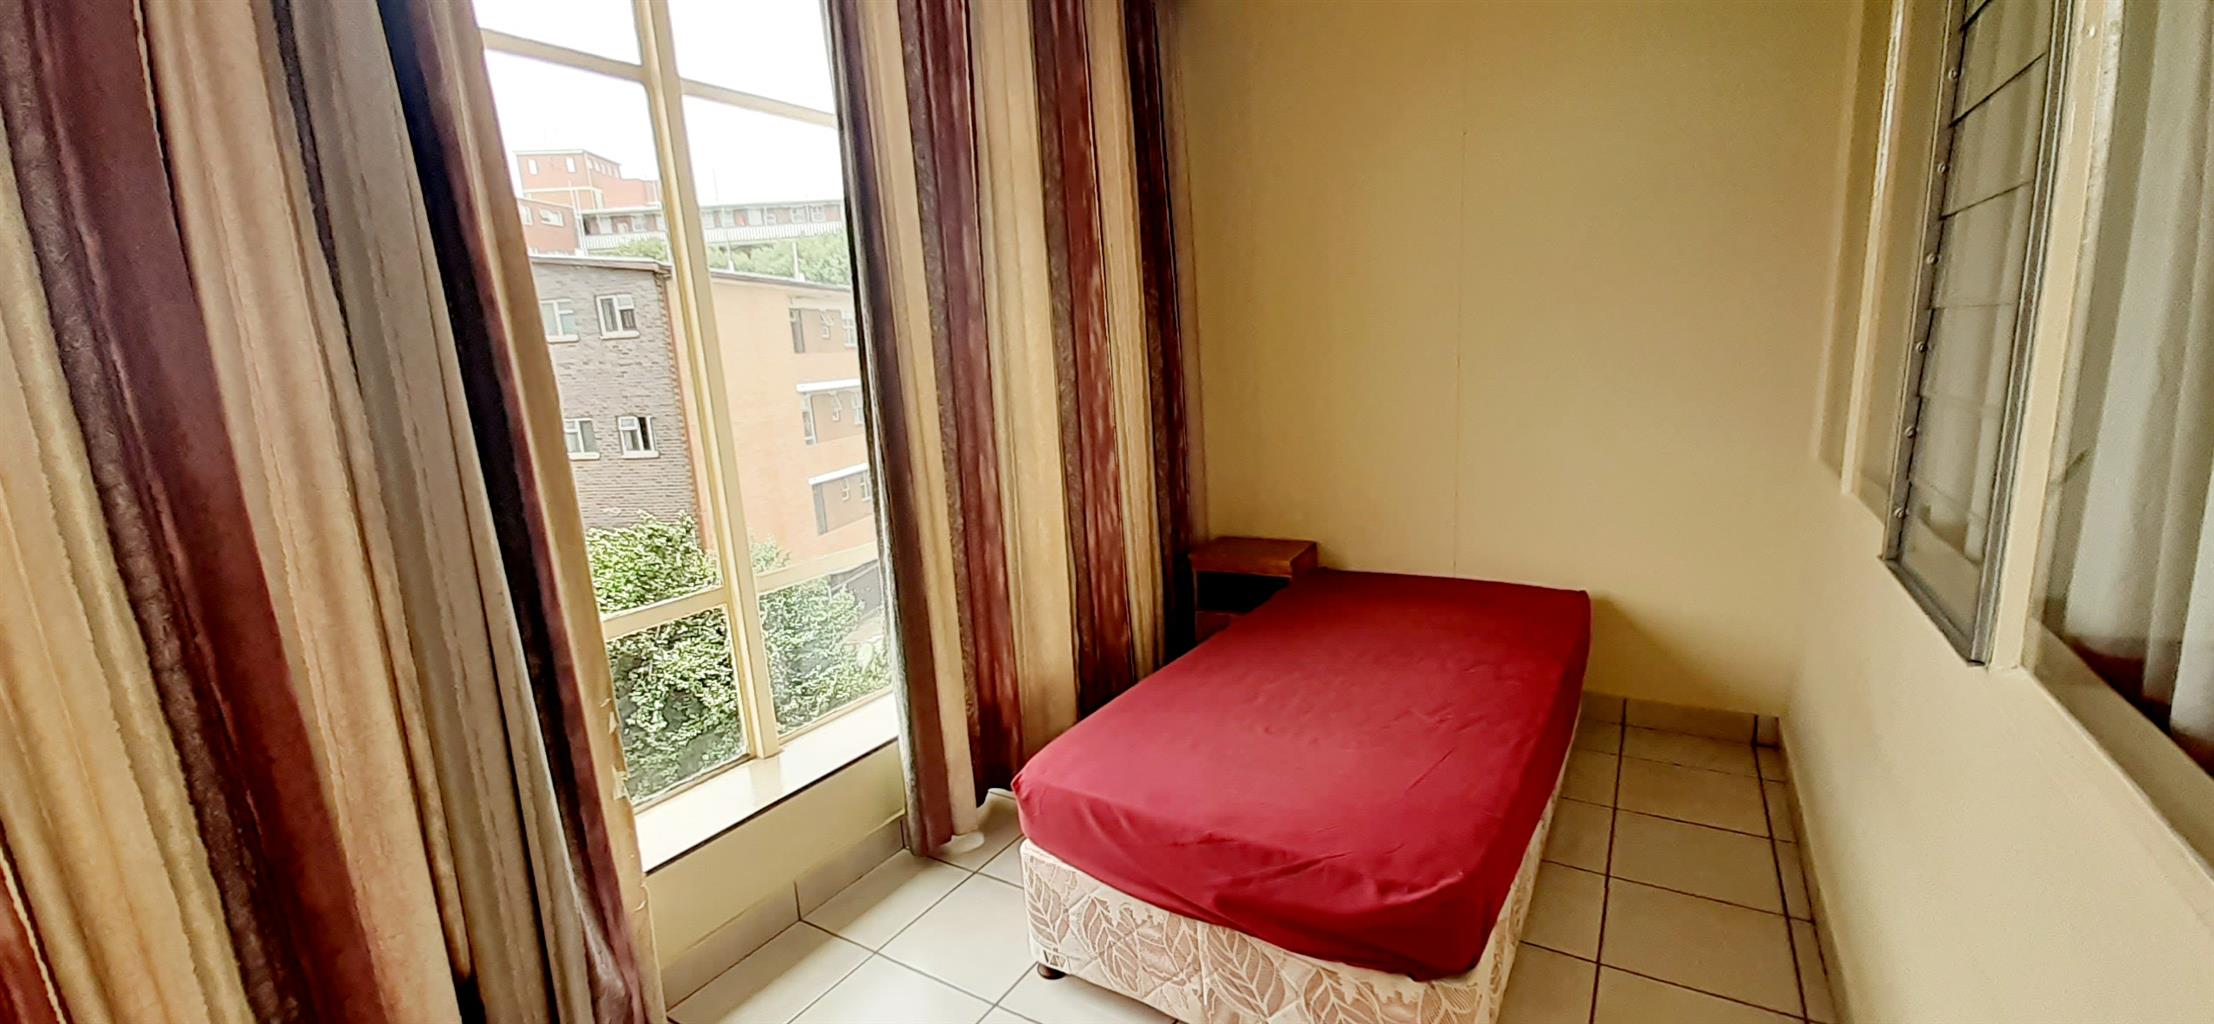 A 2.5 bedroom flat for rent in Arcadia, Pretoria near amenities and colleges